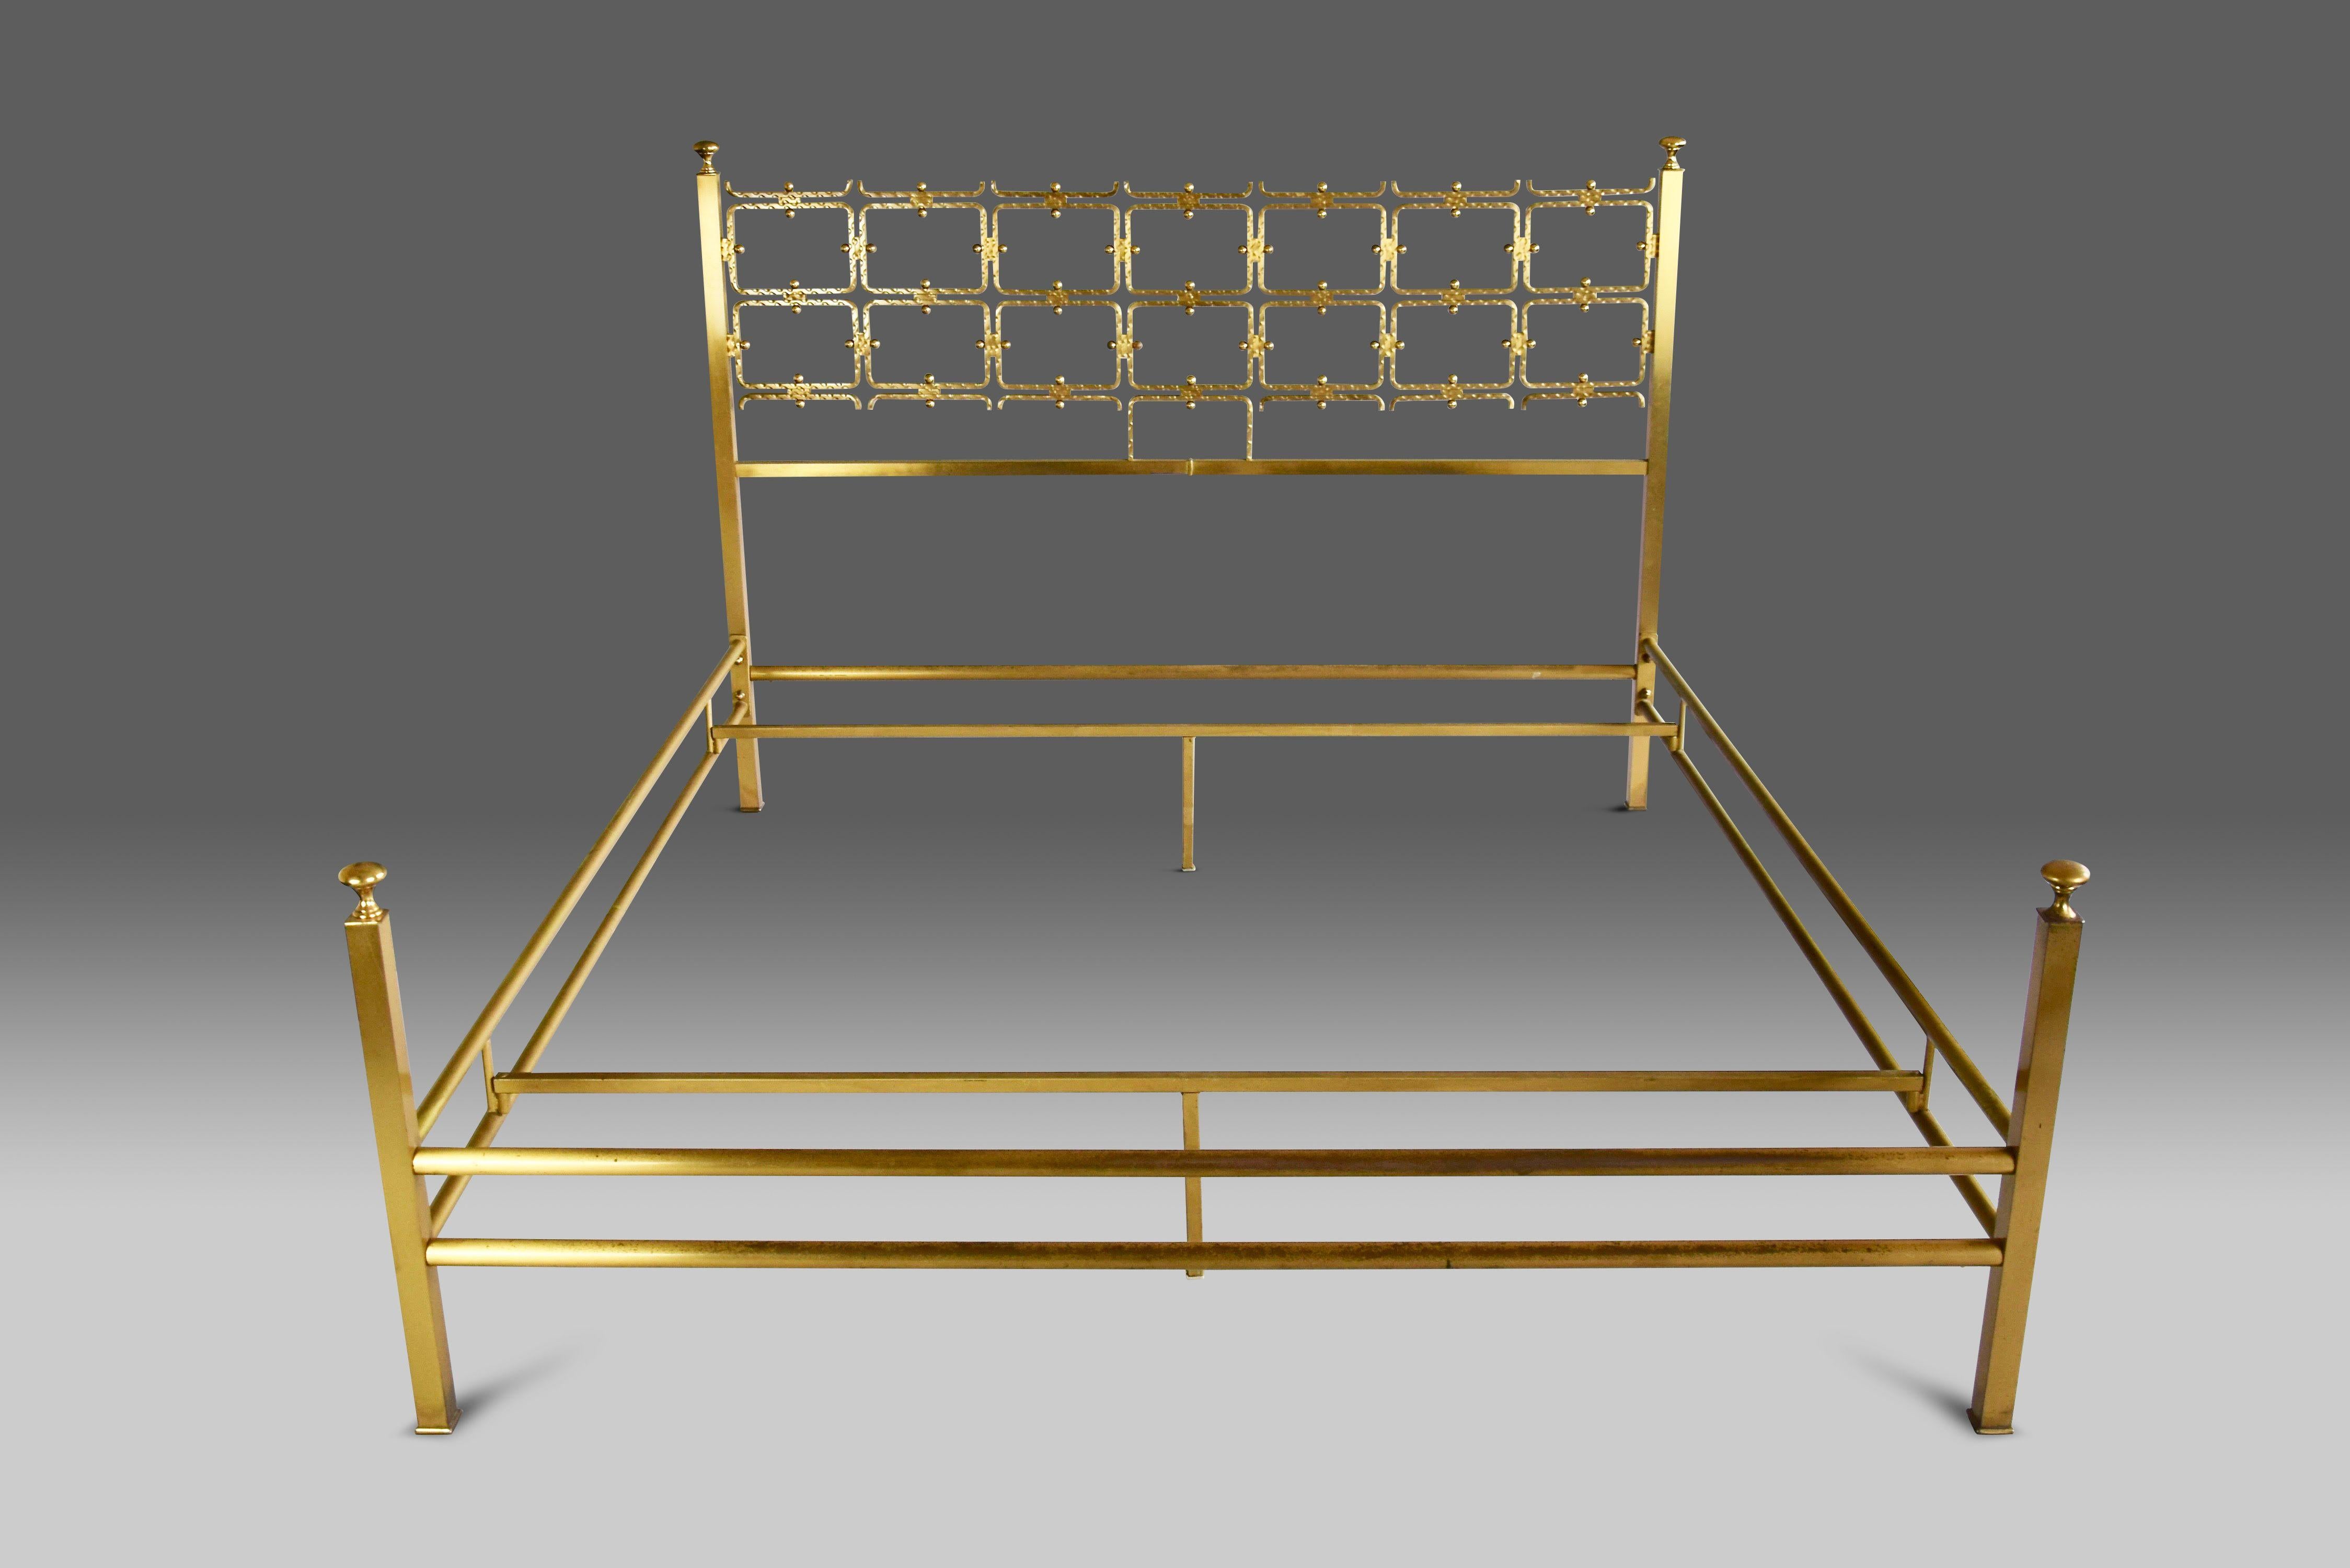 Stylish mid century double brass bed frame from the renown Italian designer, Osvaldo Borsani.
A beautiful piece of Italian mid century design that will look fabulous in any bedroom.
Produced in the 1950's, the principal structure of the bed,